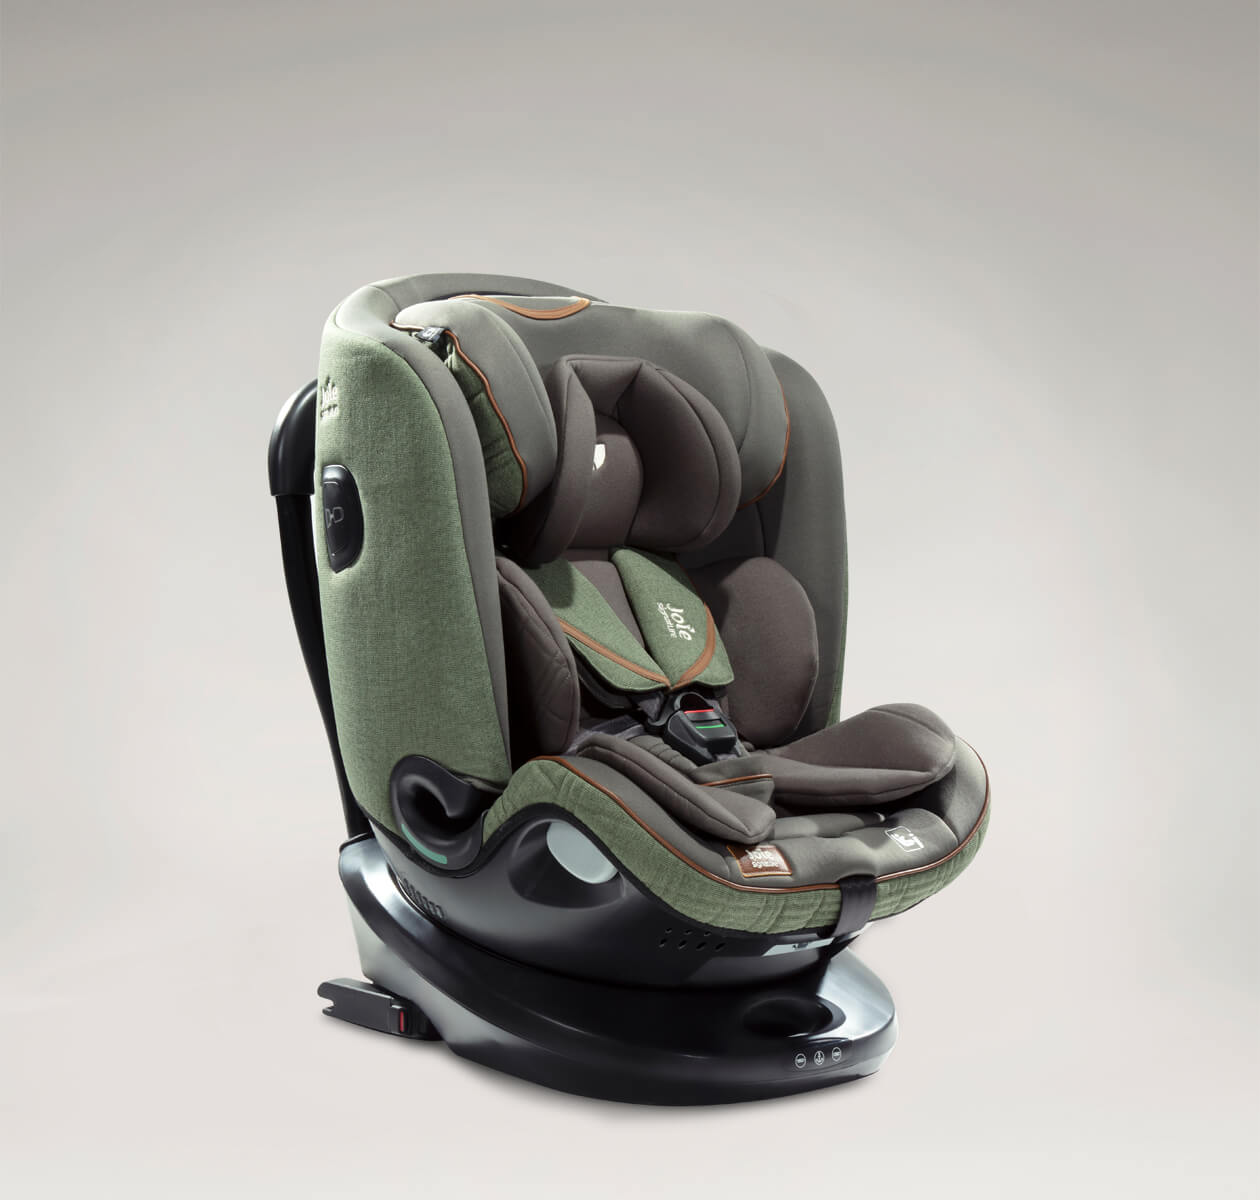 Forest green Joie i-Spin Grow car seat at an angle.